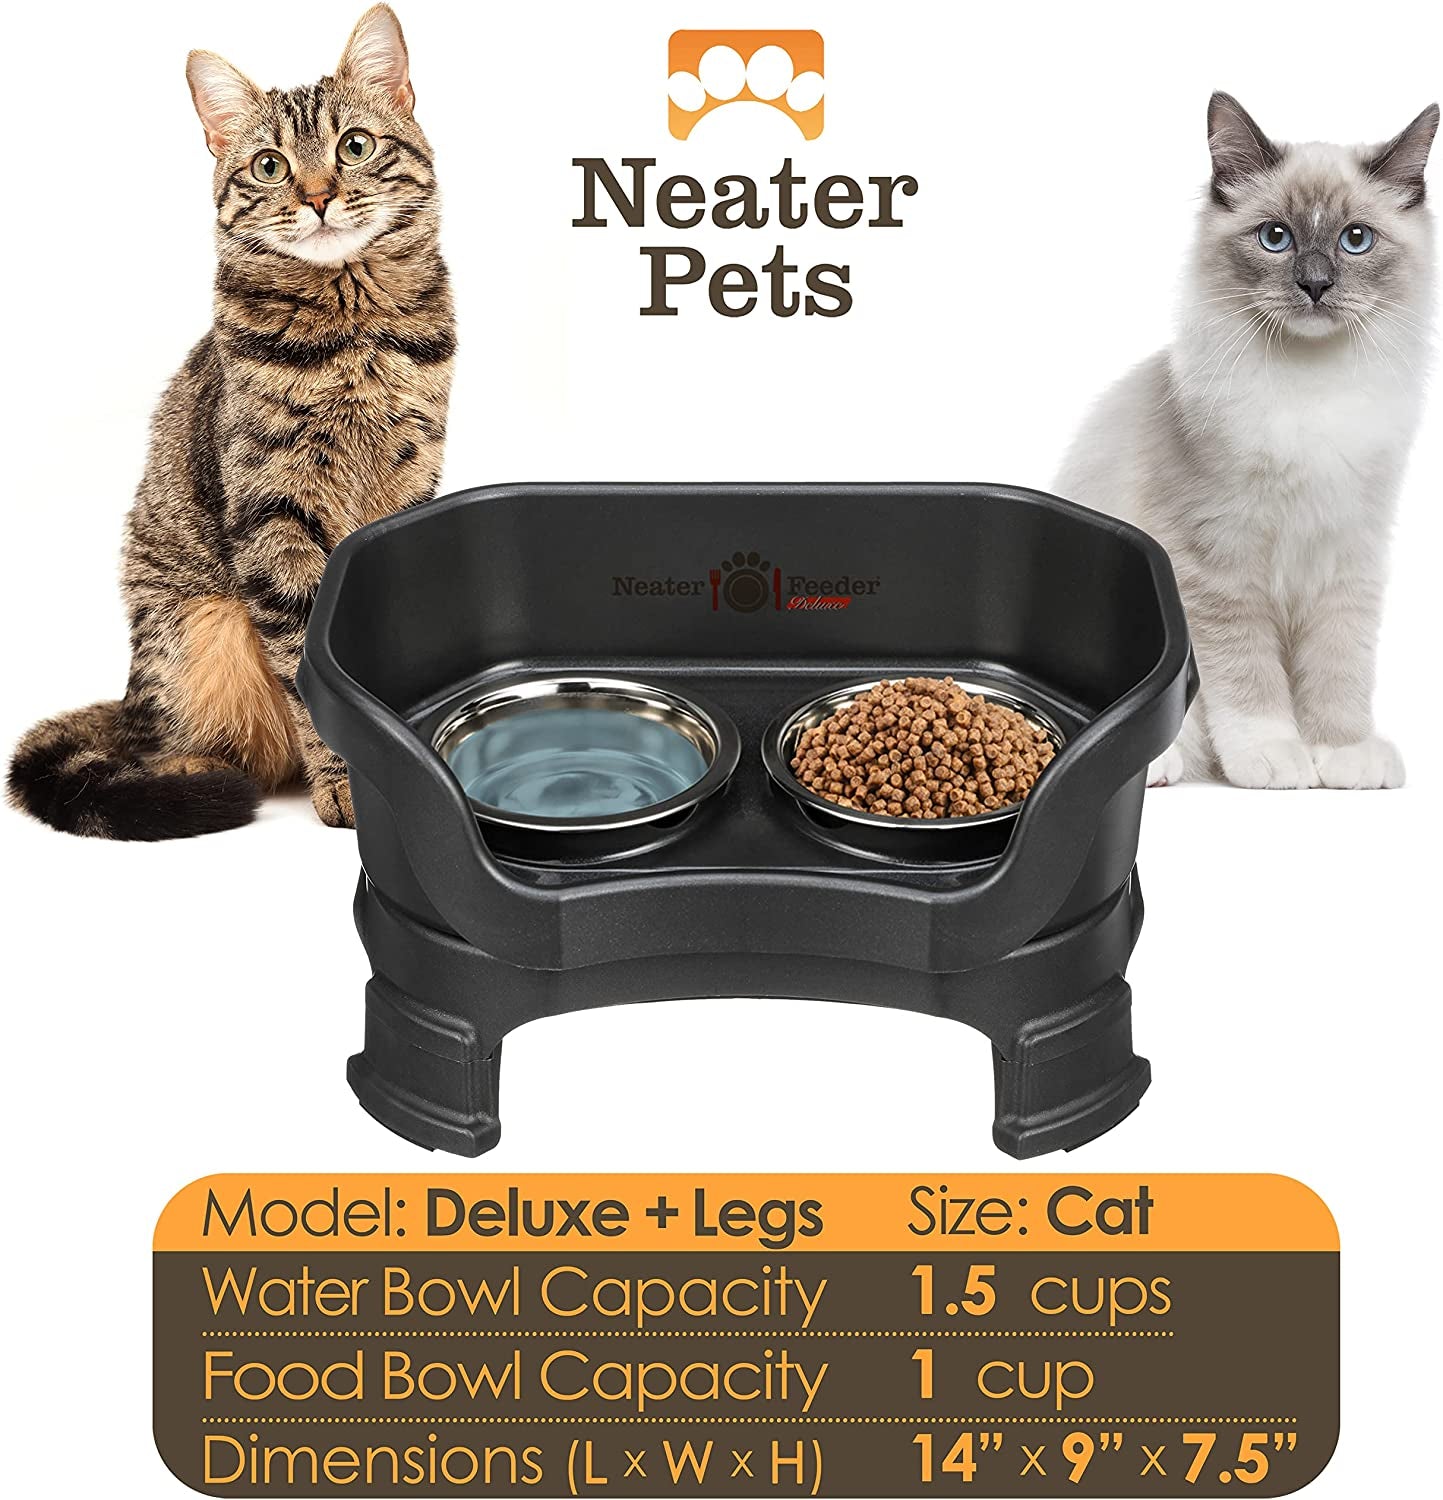 Neater Feeder Deluxe for Cats with Leg Extensions - Elevated Food & Water Bowls - Mess-Free Raised Feeder, Midnight Black